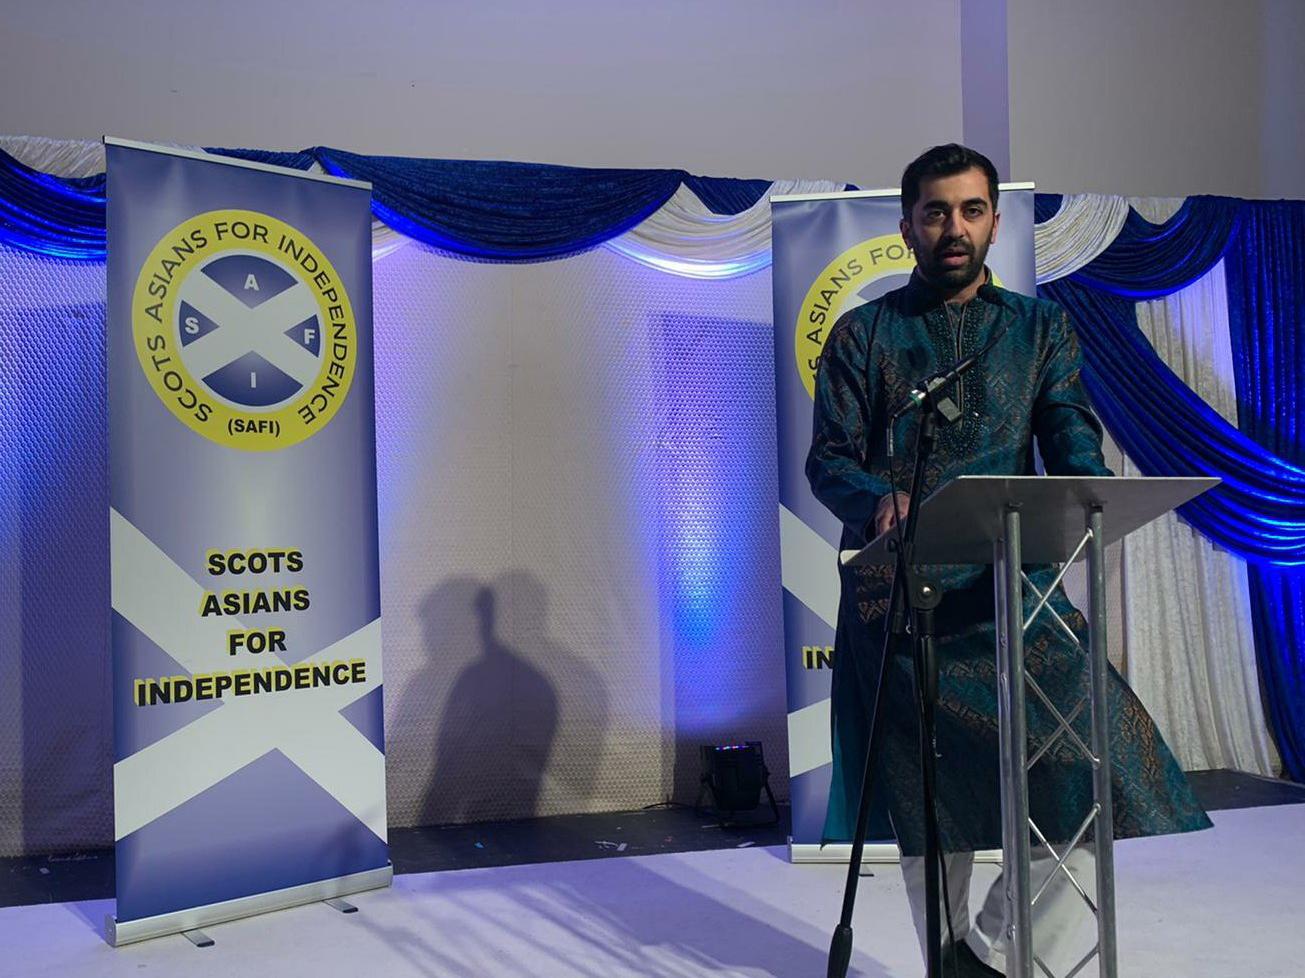 Humza Yousaf (born 7 April 1985) is a Scottish politician who is the Minister for Europe and International Development and a Scottish National Party Member of the Scottish Parliament for Glasgow. 